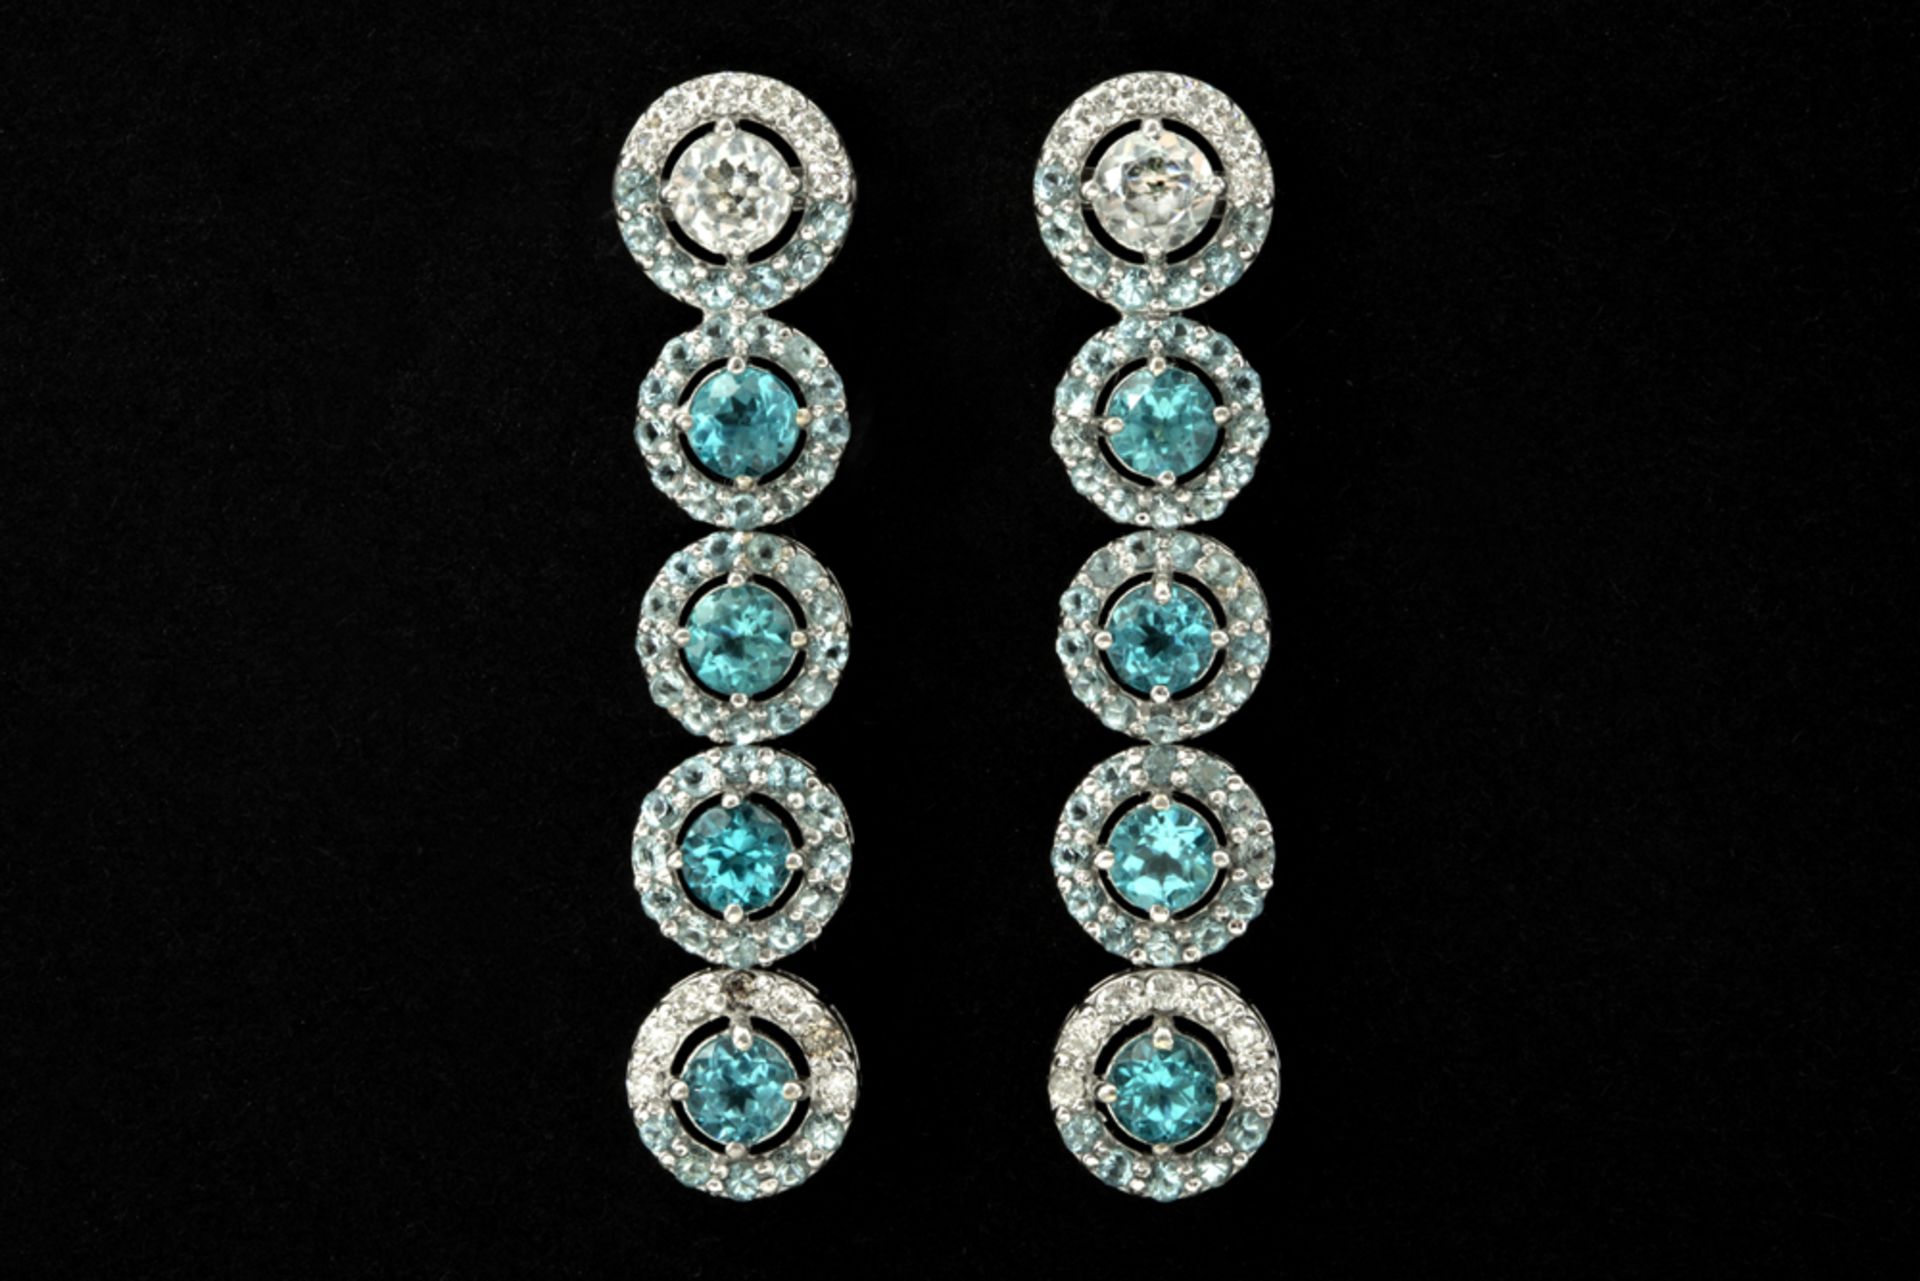 very elegant pair of earrings in white gold (18 carat) with at least 3 carat of Topaz and ca 1 carat